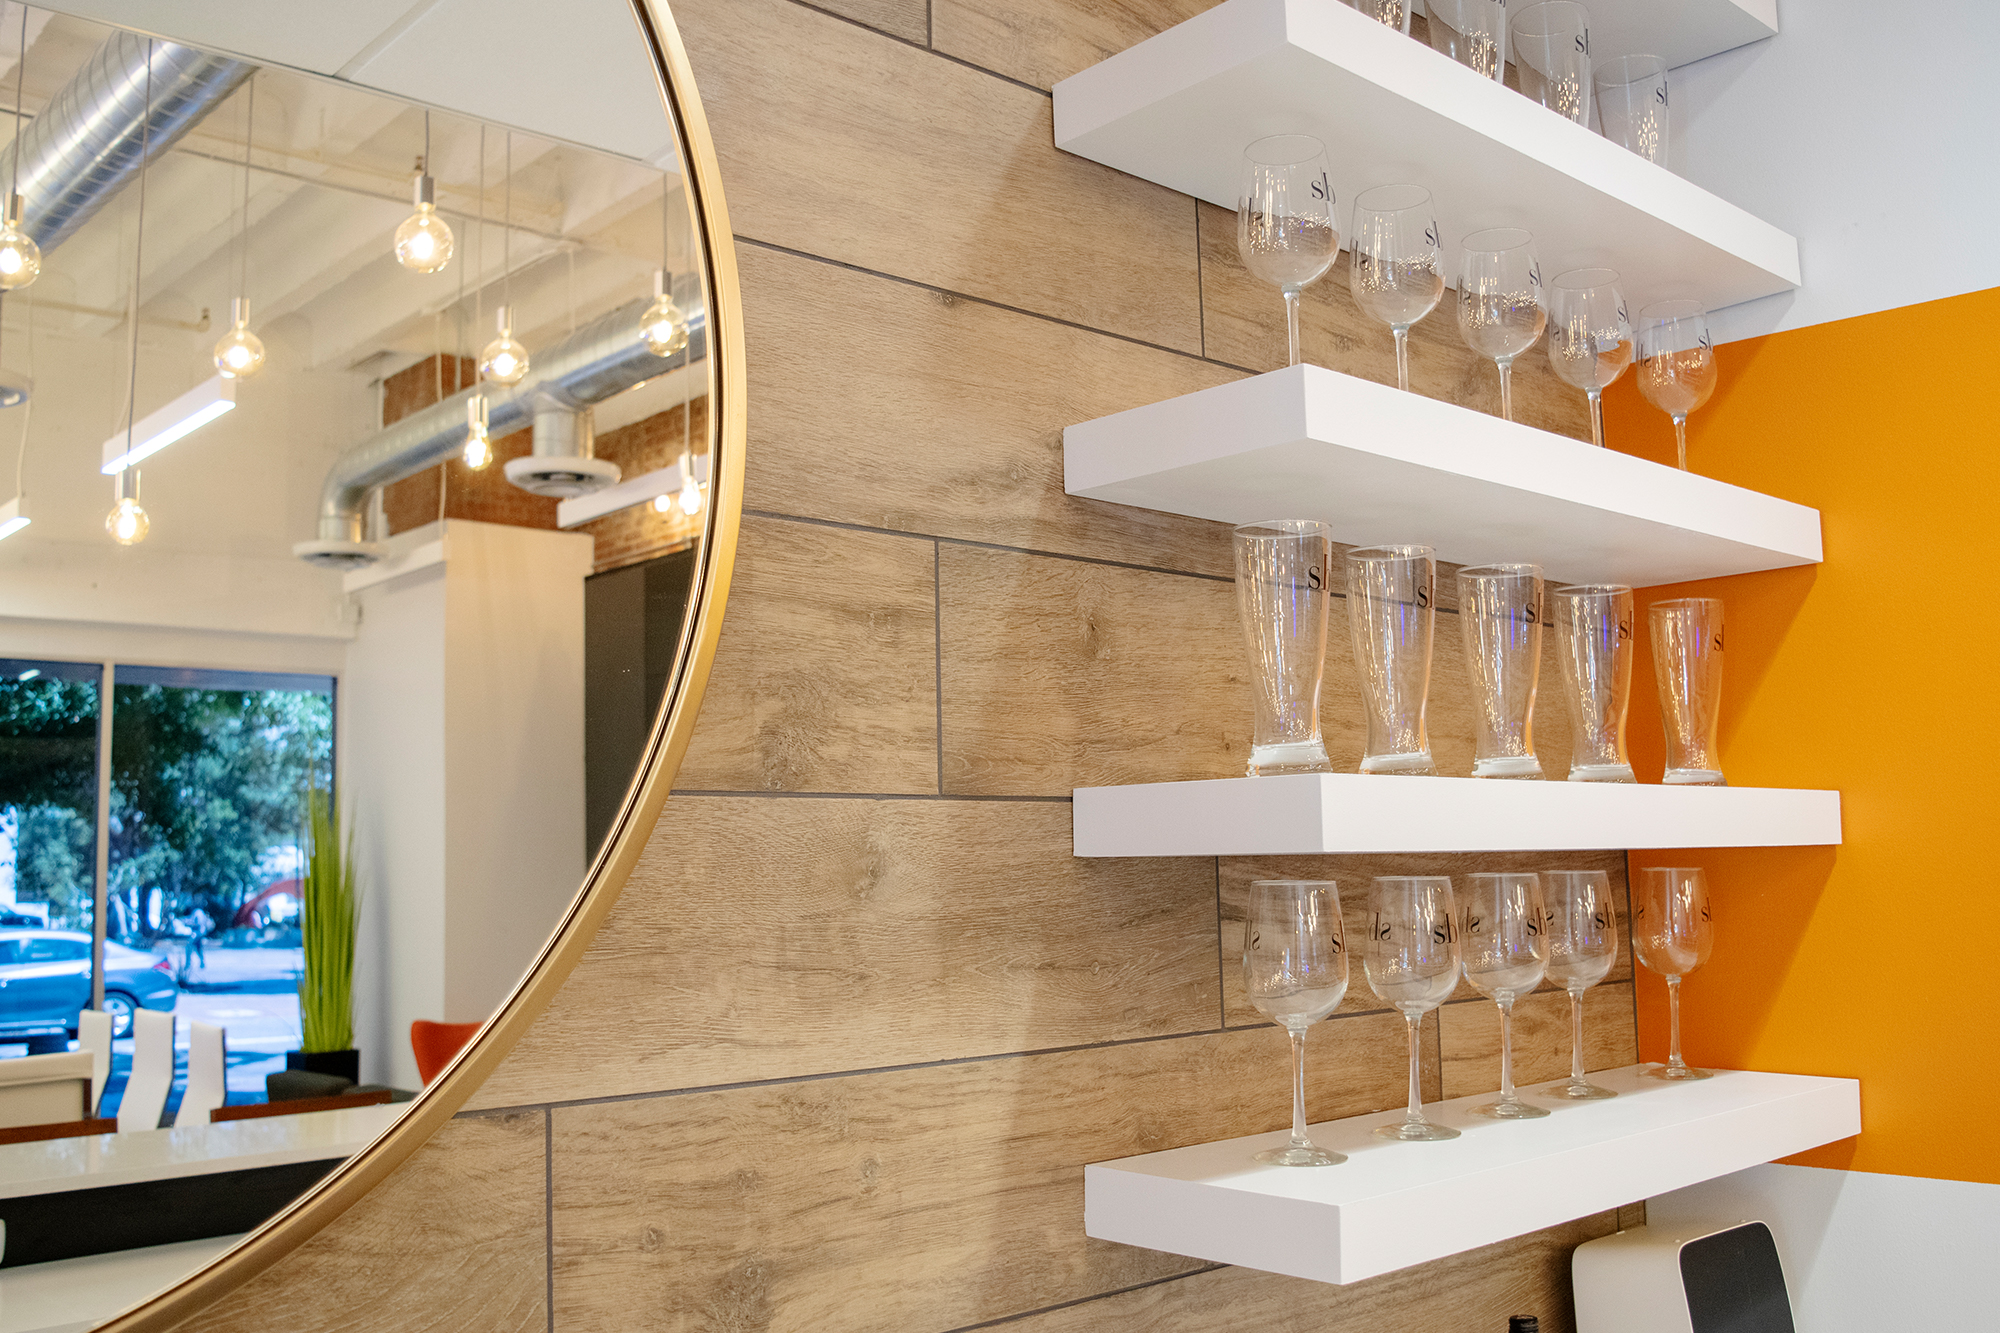 Picture of shelves holding various drinking glasses.